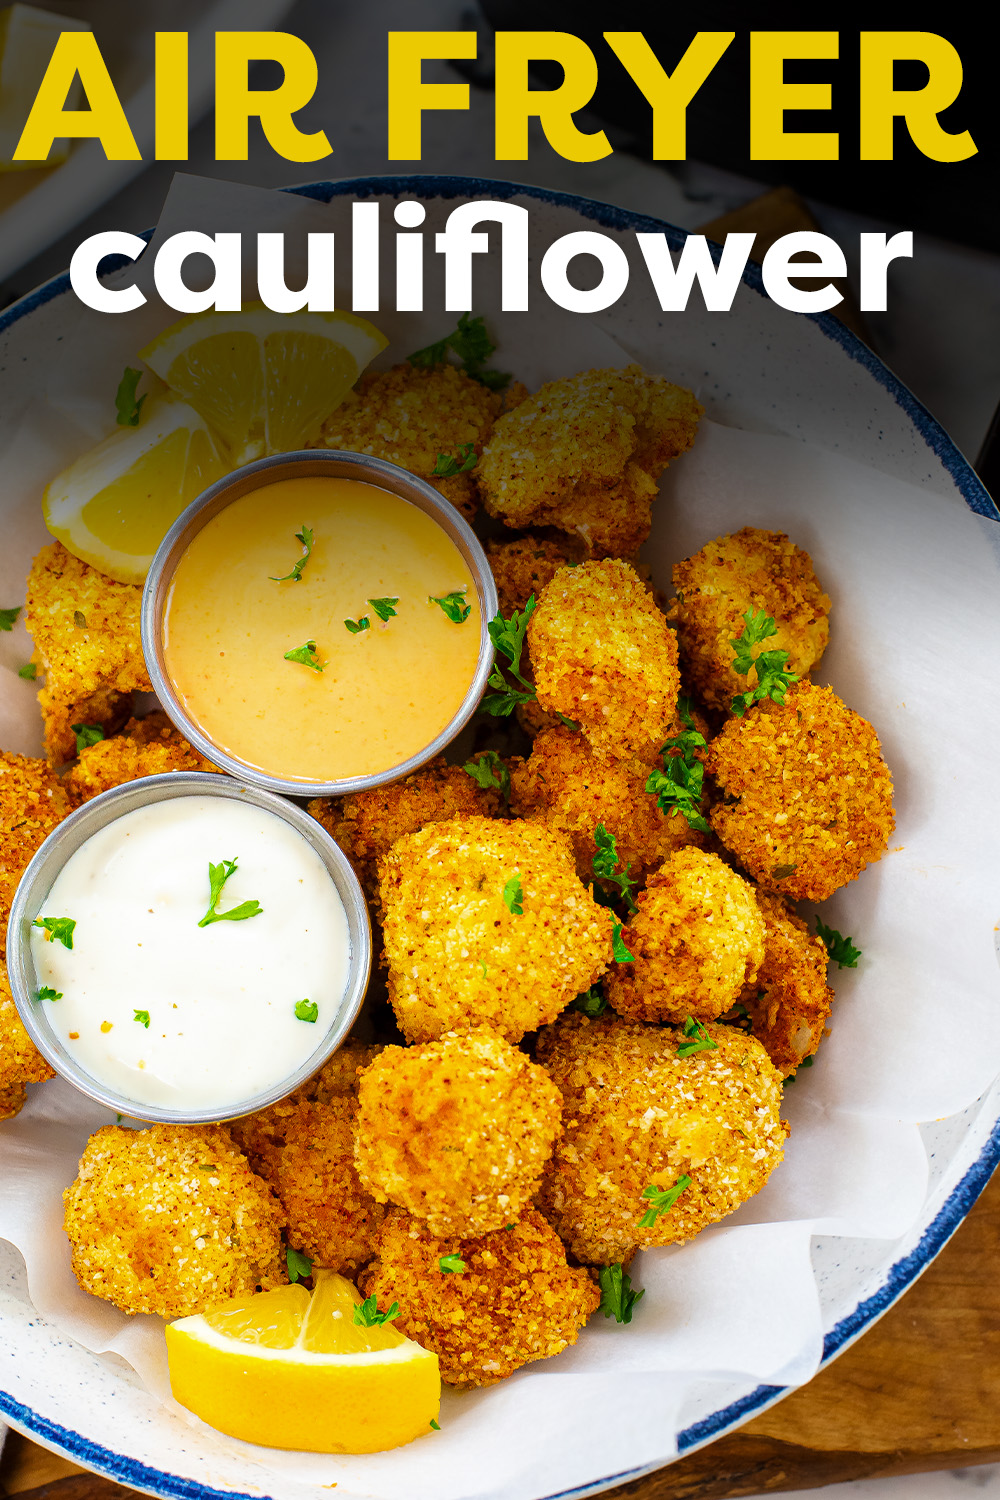 Our Air Fryer Breaded Cauliflower is coated with a simple, flavorful panko mixture, tossed in the air fryer, and cooked until crispy. Serve with your favorite dip and enjoy!